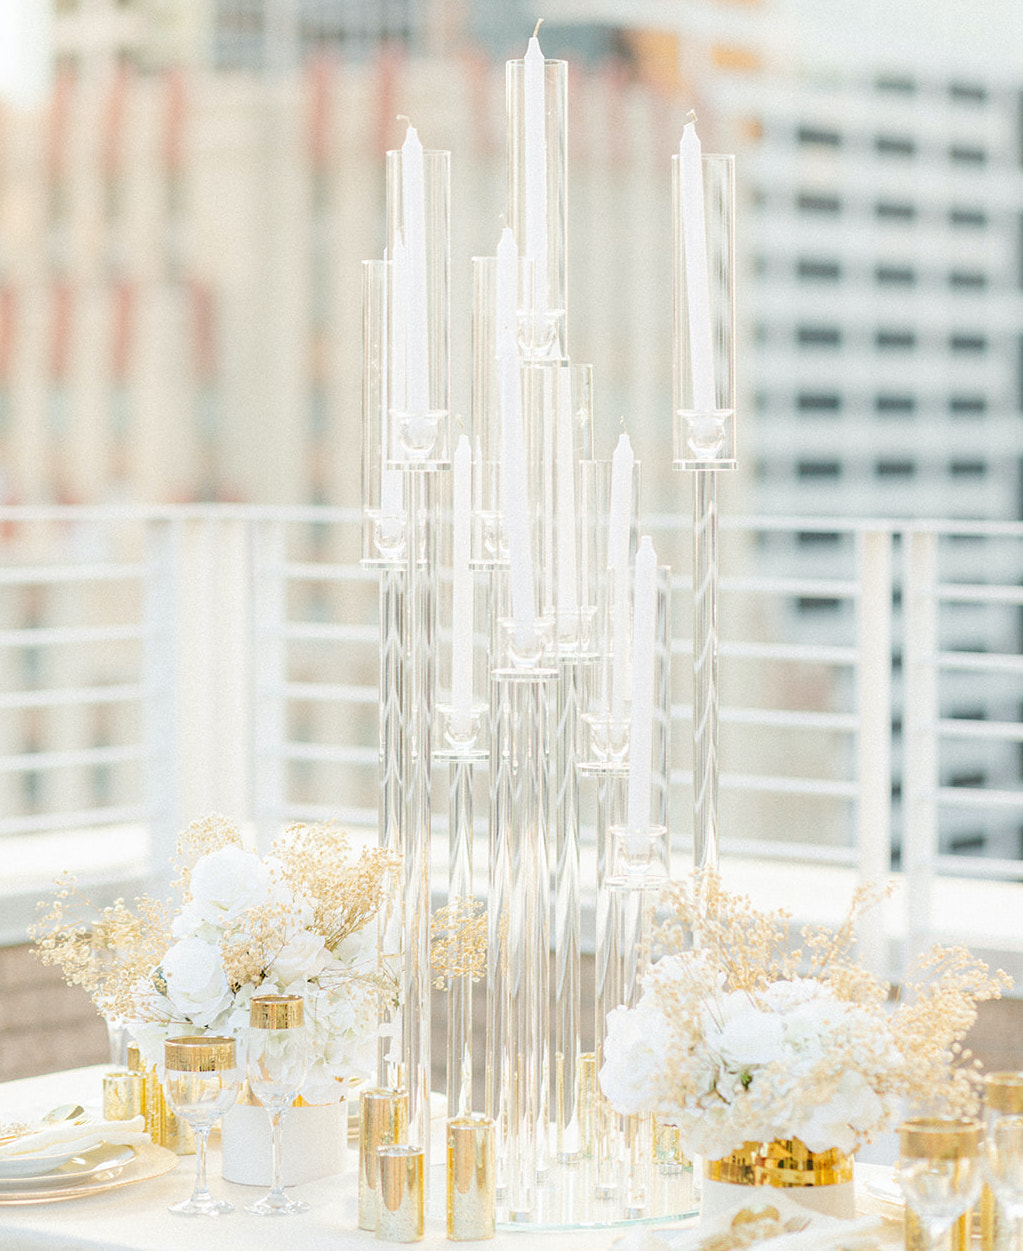 A close up photo of the tall candle votives that are translucent glass. Gold accented flower arrangements and dinnerware surround the tall candles.